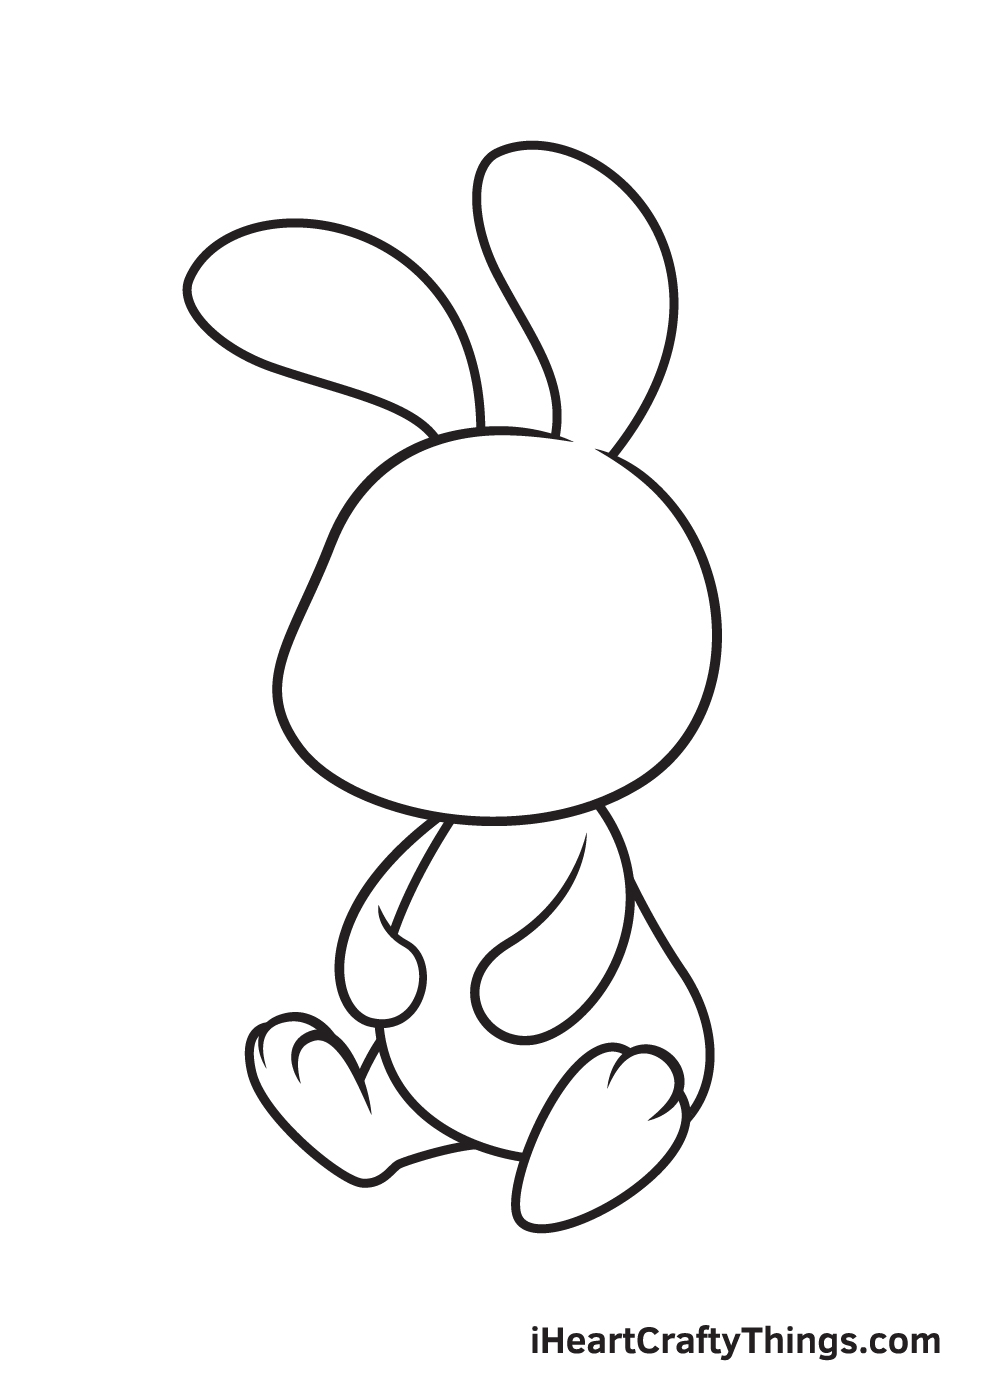 How to draw a rabbit easy step by step || Bunny rabbit drawing - YouTube-nextbuild.com.vn